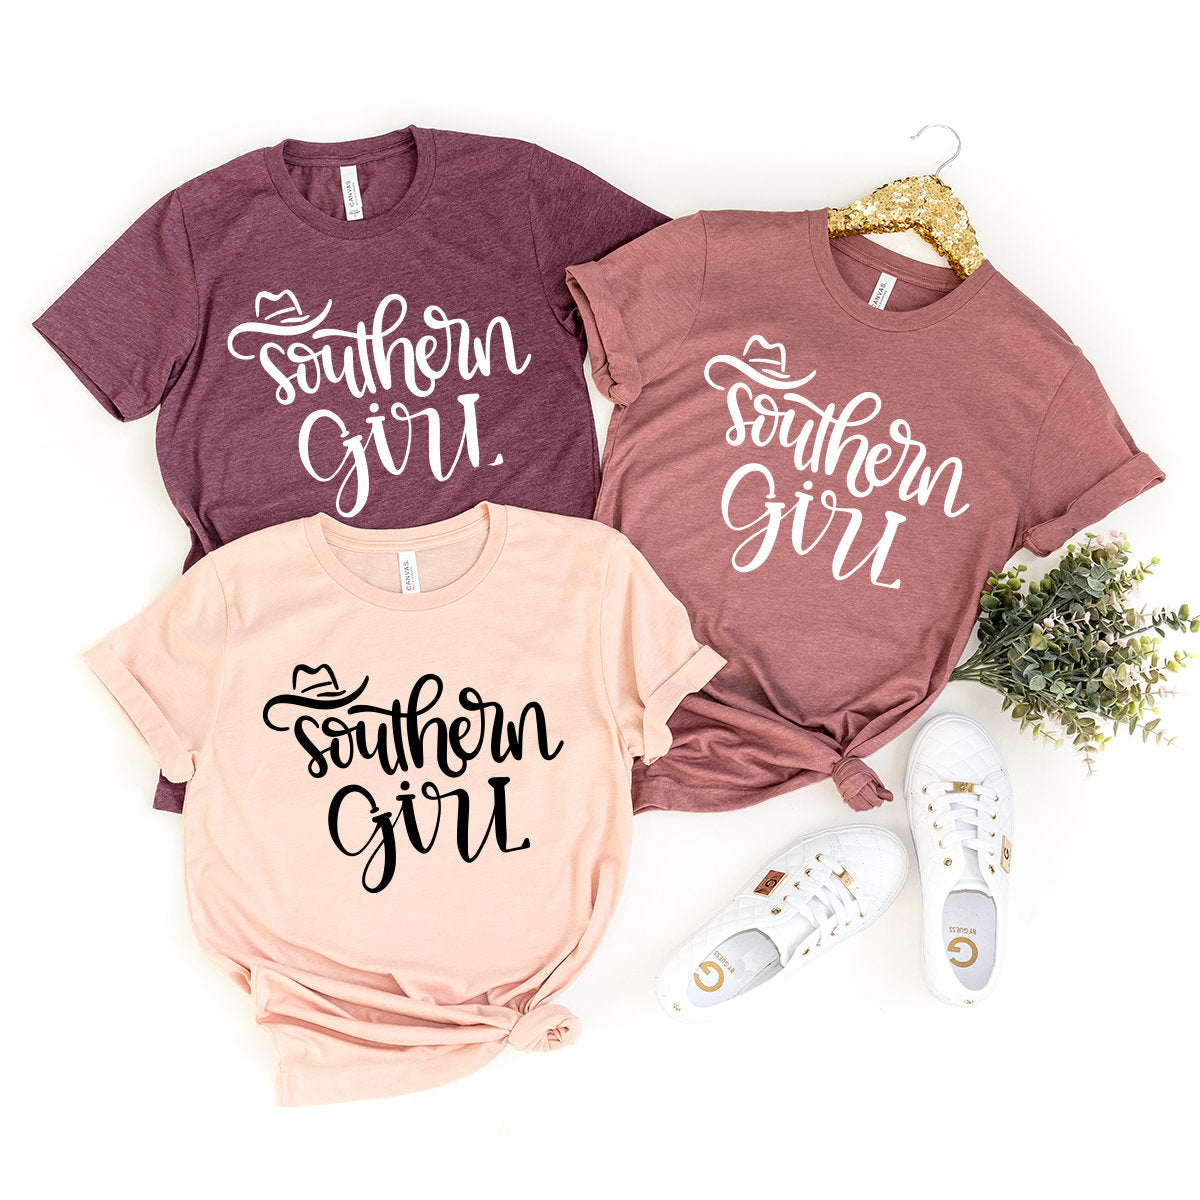 Southern Girl Shirt, Western Girl Shirt, Country Girl Shirt, Cowgirl Shirt, Southern Shirt, Southern Girl Clothing, Country T-Shirt - Fastdeliverytees.com